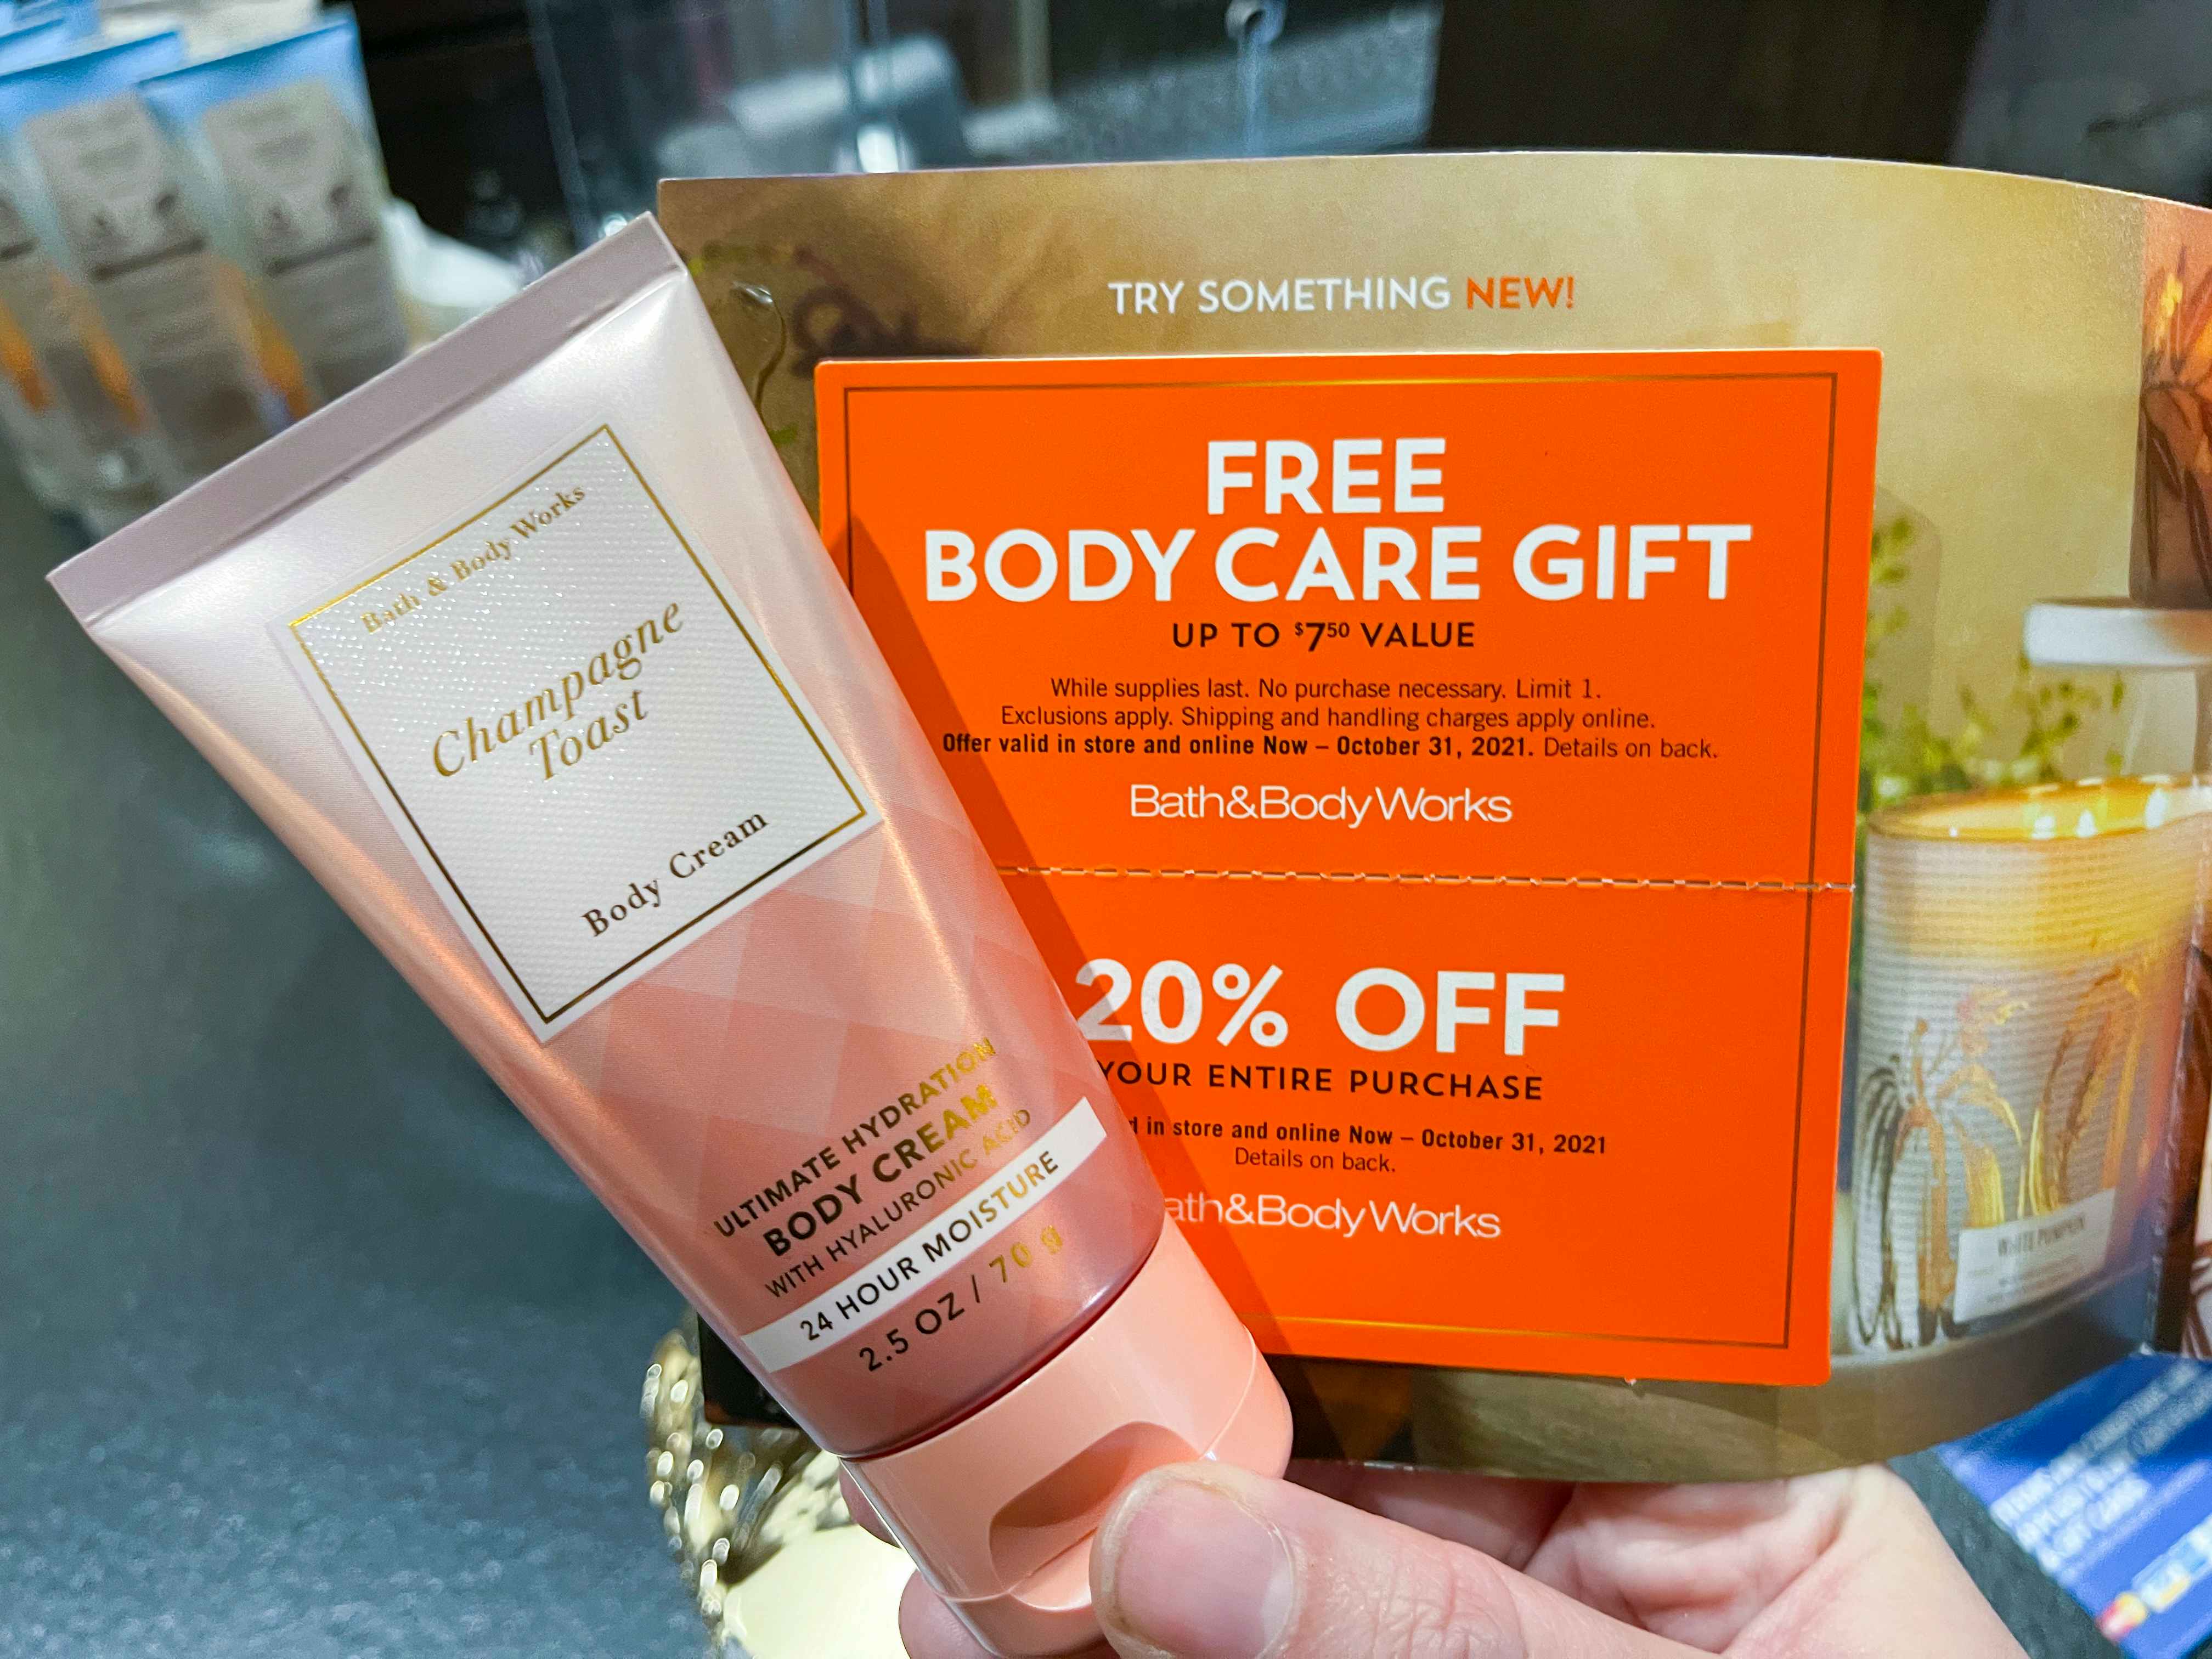 A person's hand holding a bottle of Bath and Body Works Champagne Toast body cream and a coupon for a Free Body Care Gift at Bath and Body Works.